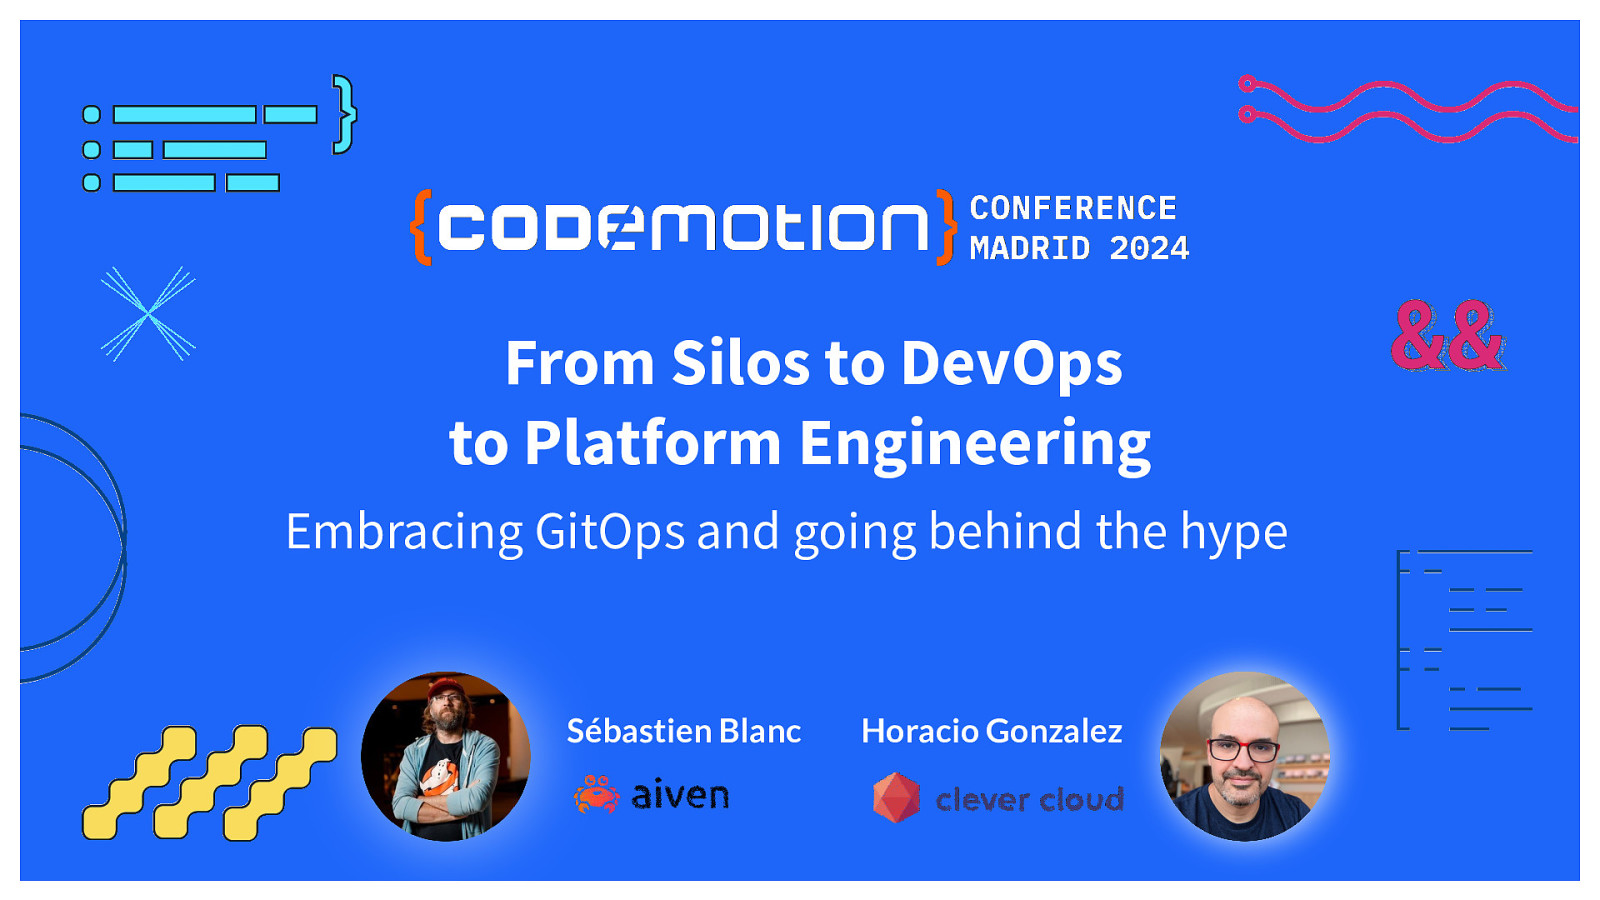 From Silos to DevOps to Platform Engineering: embracing GitOps and going behind the hype